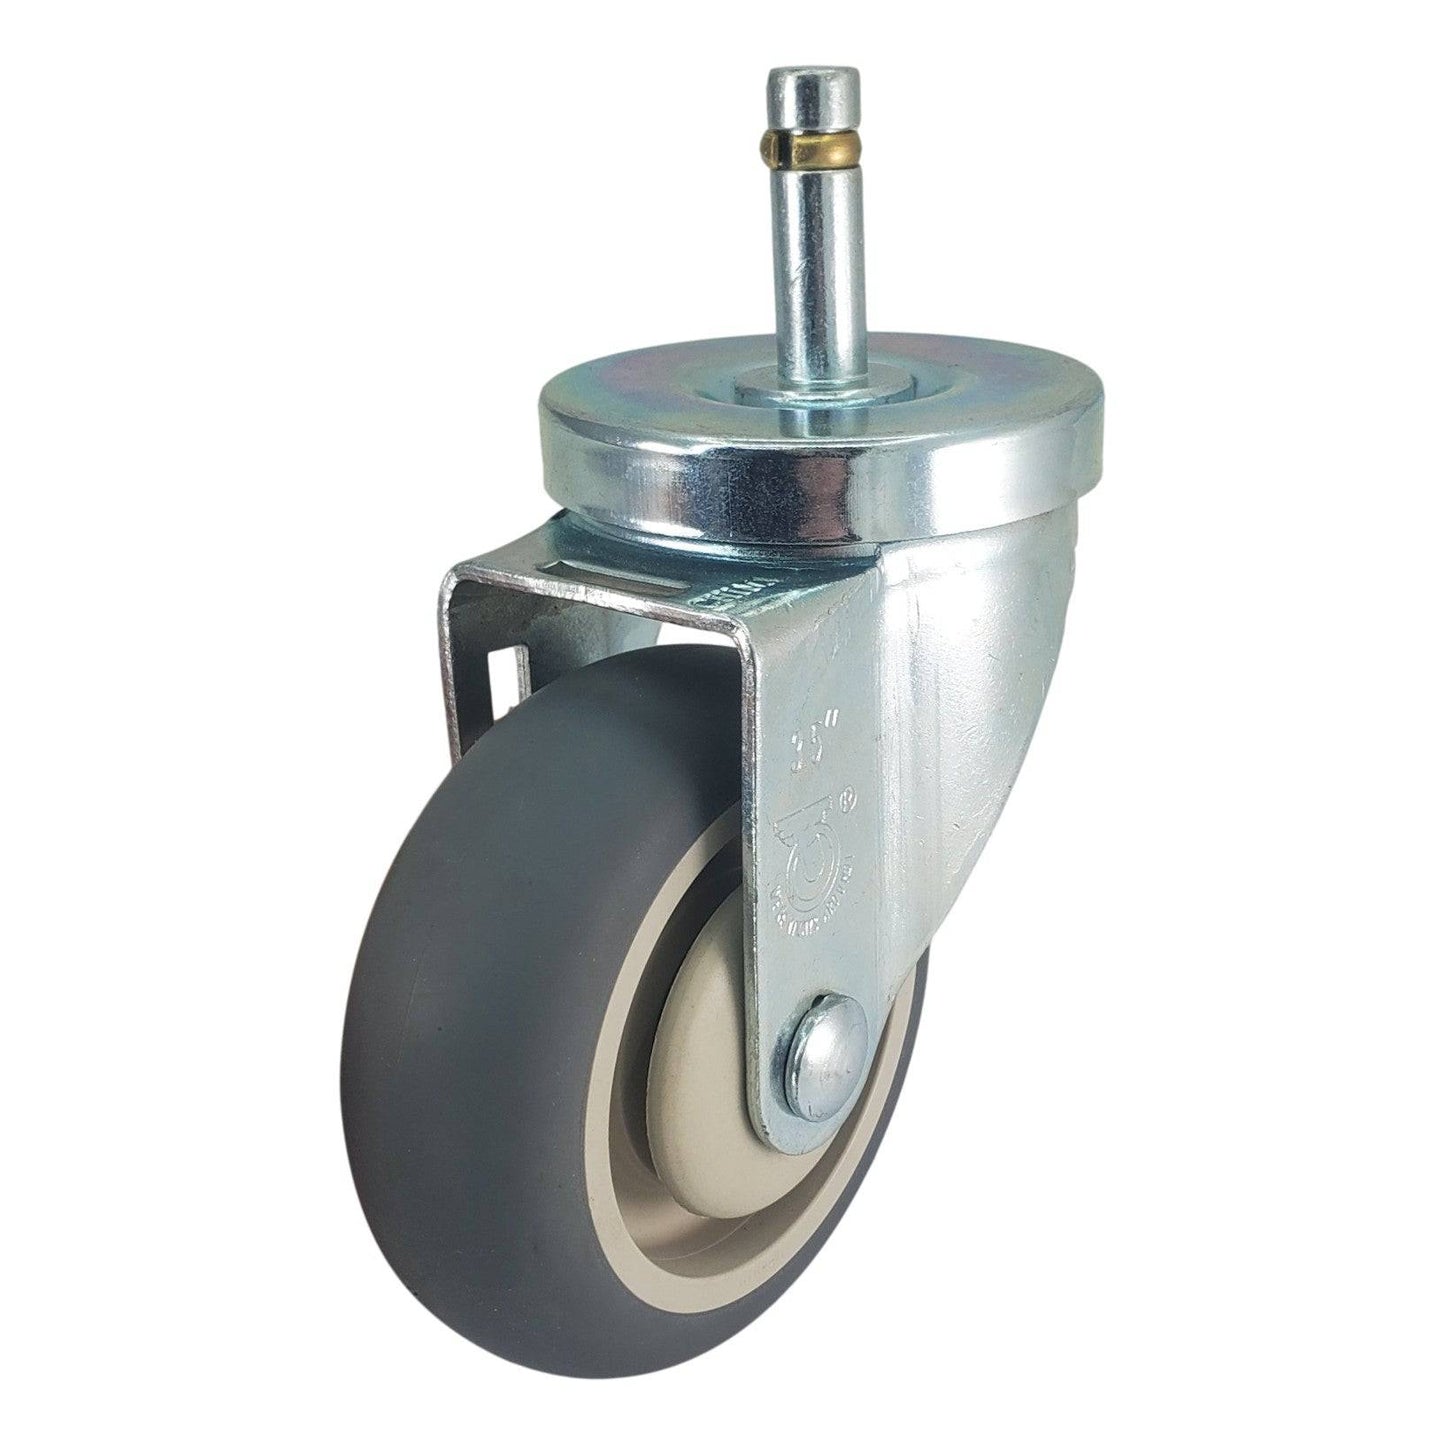 3-1/2" x 1-1/4" Thermo-Pro Swivel Grip Ring Stem Caster - 230 lbs. Cap. - Durable Superior Casters